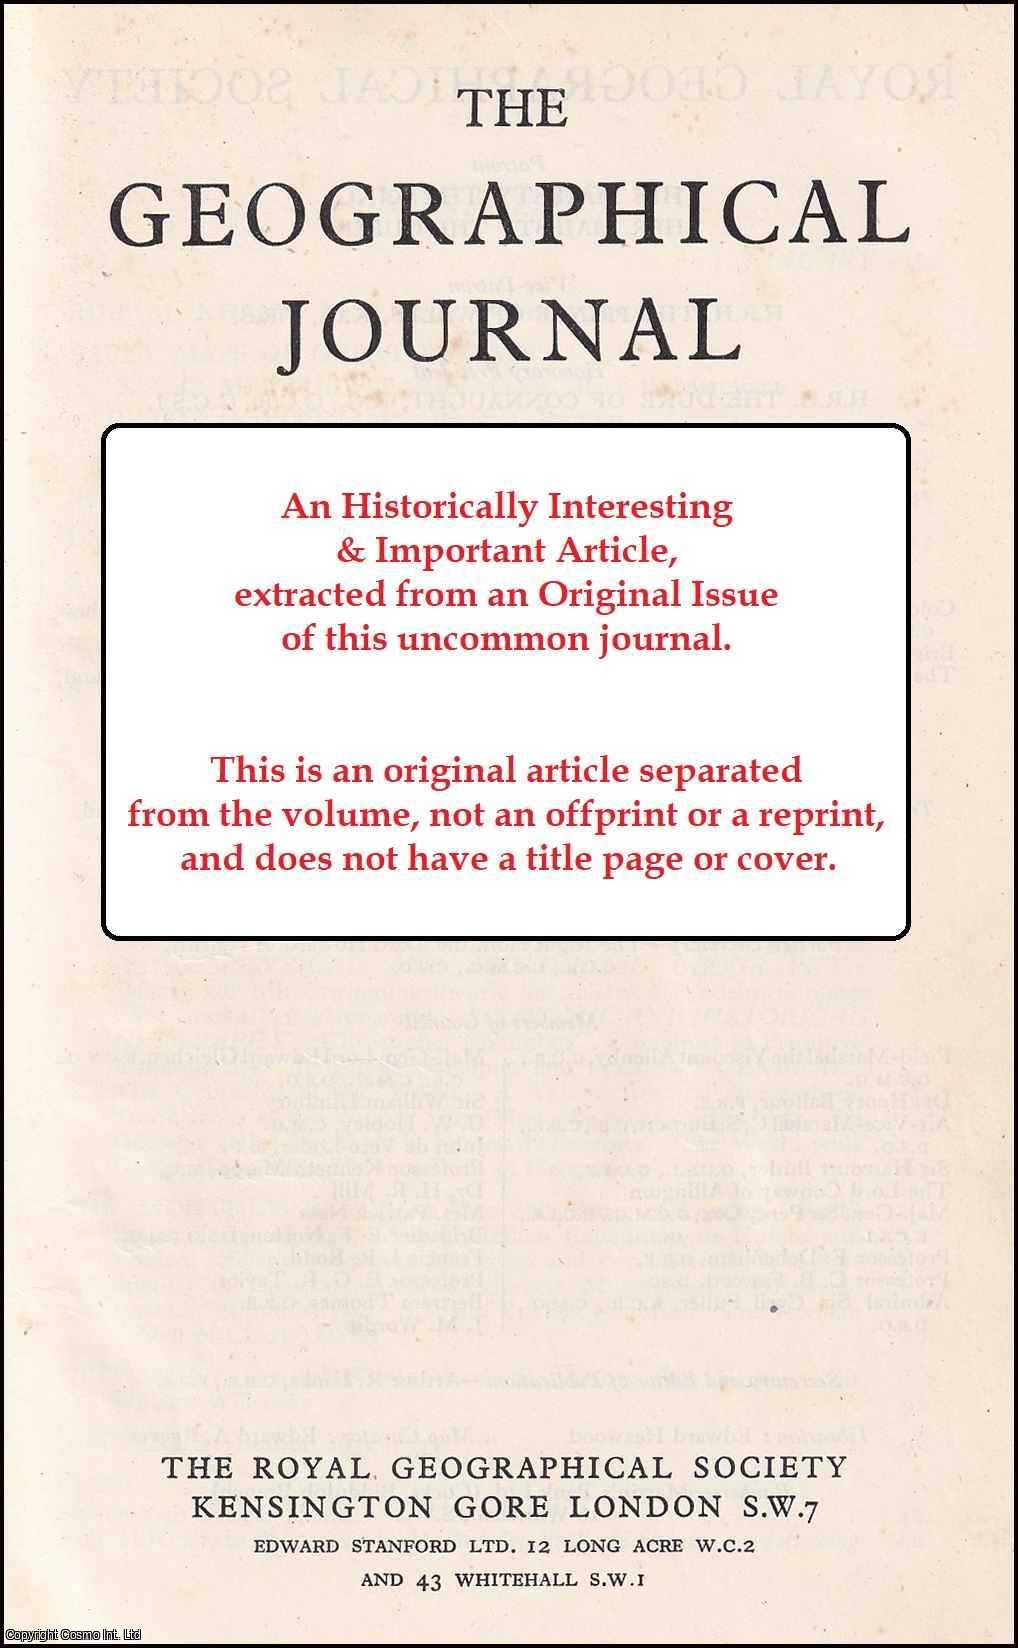 Eric C. Barrett - The Tropical Far East: Essa Satellite Evaluations of High Season Climatic Patterns. An original article from the Geographical Journal, 1971.